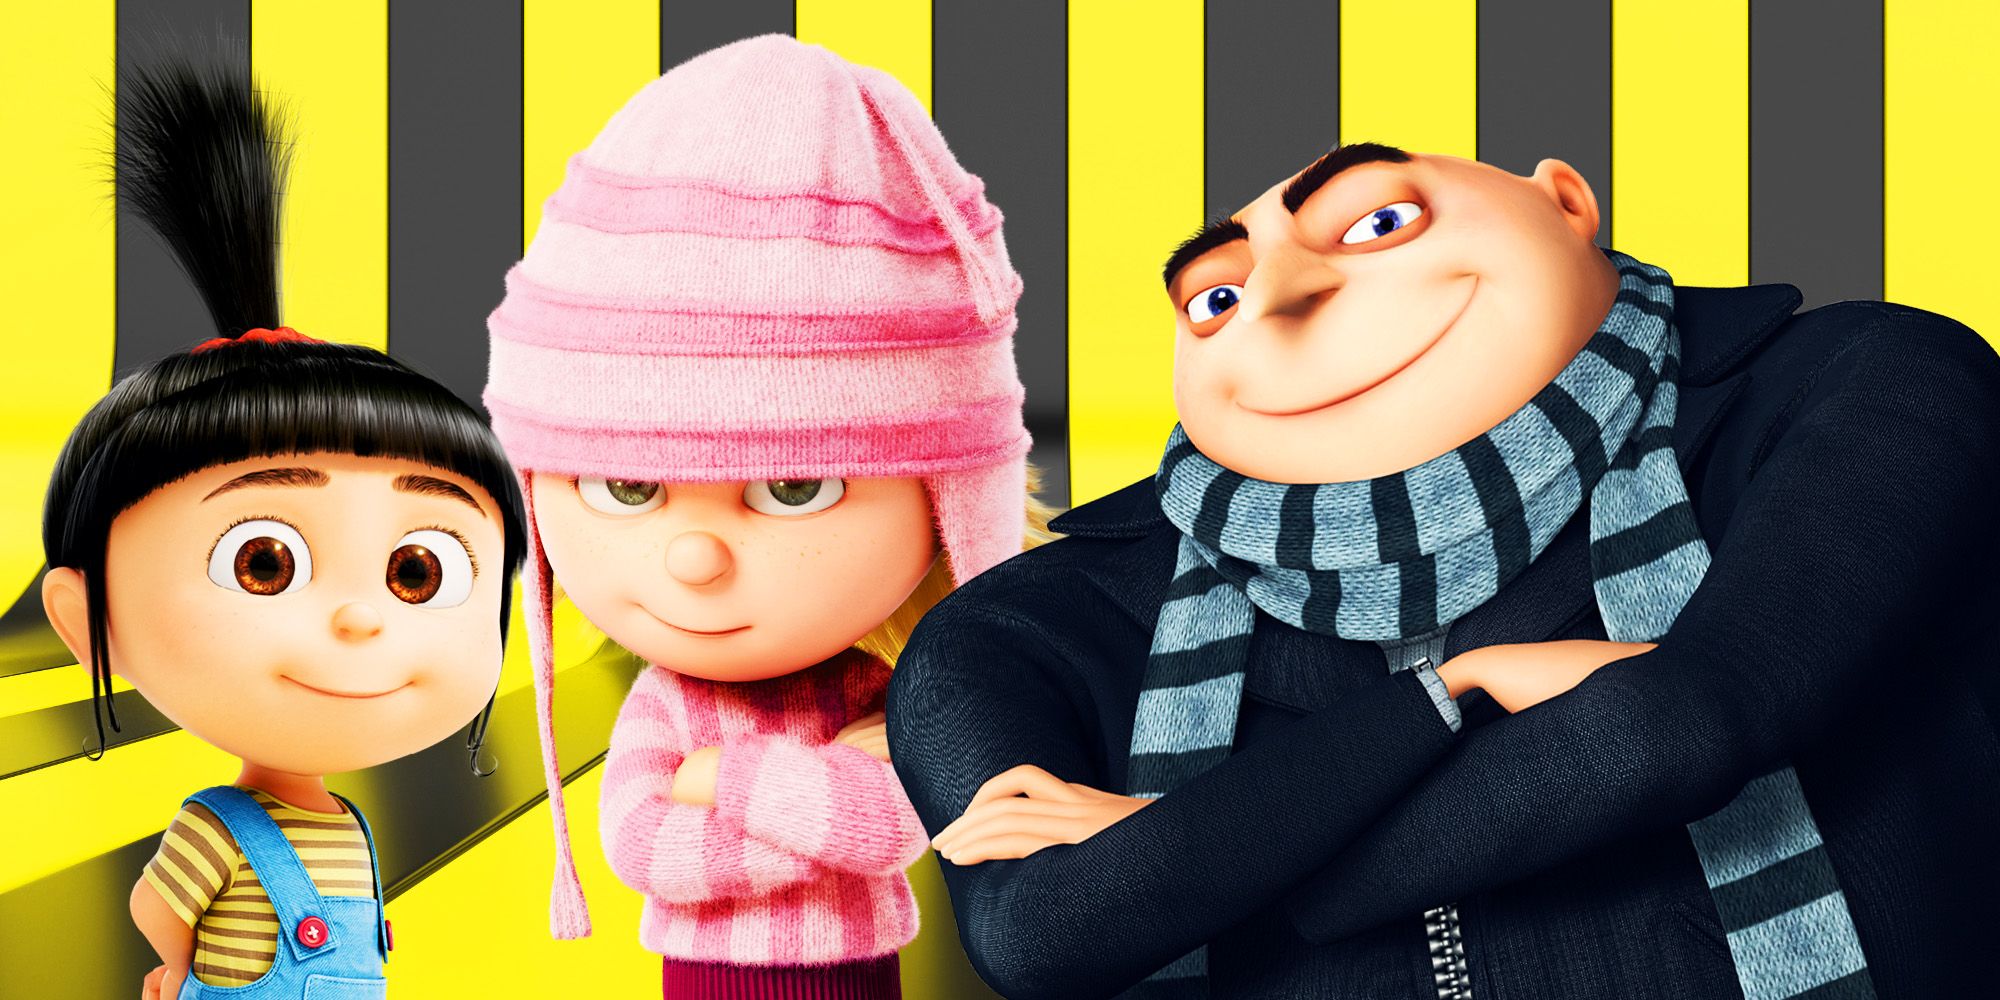 Agnes, Edith, and Gru from Despicable Me